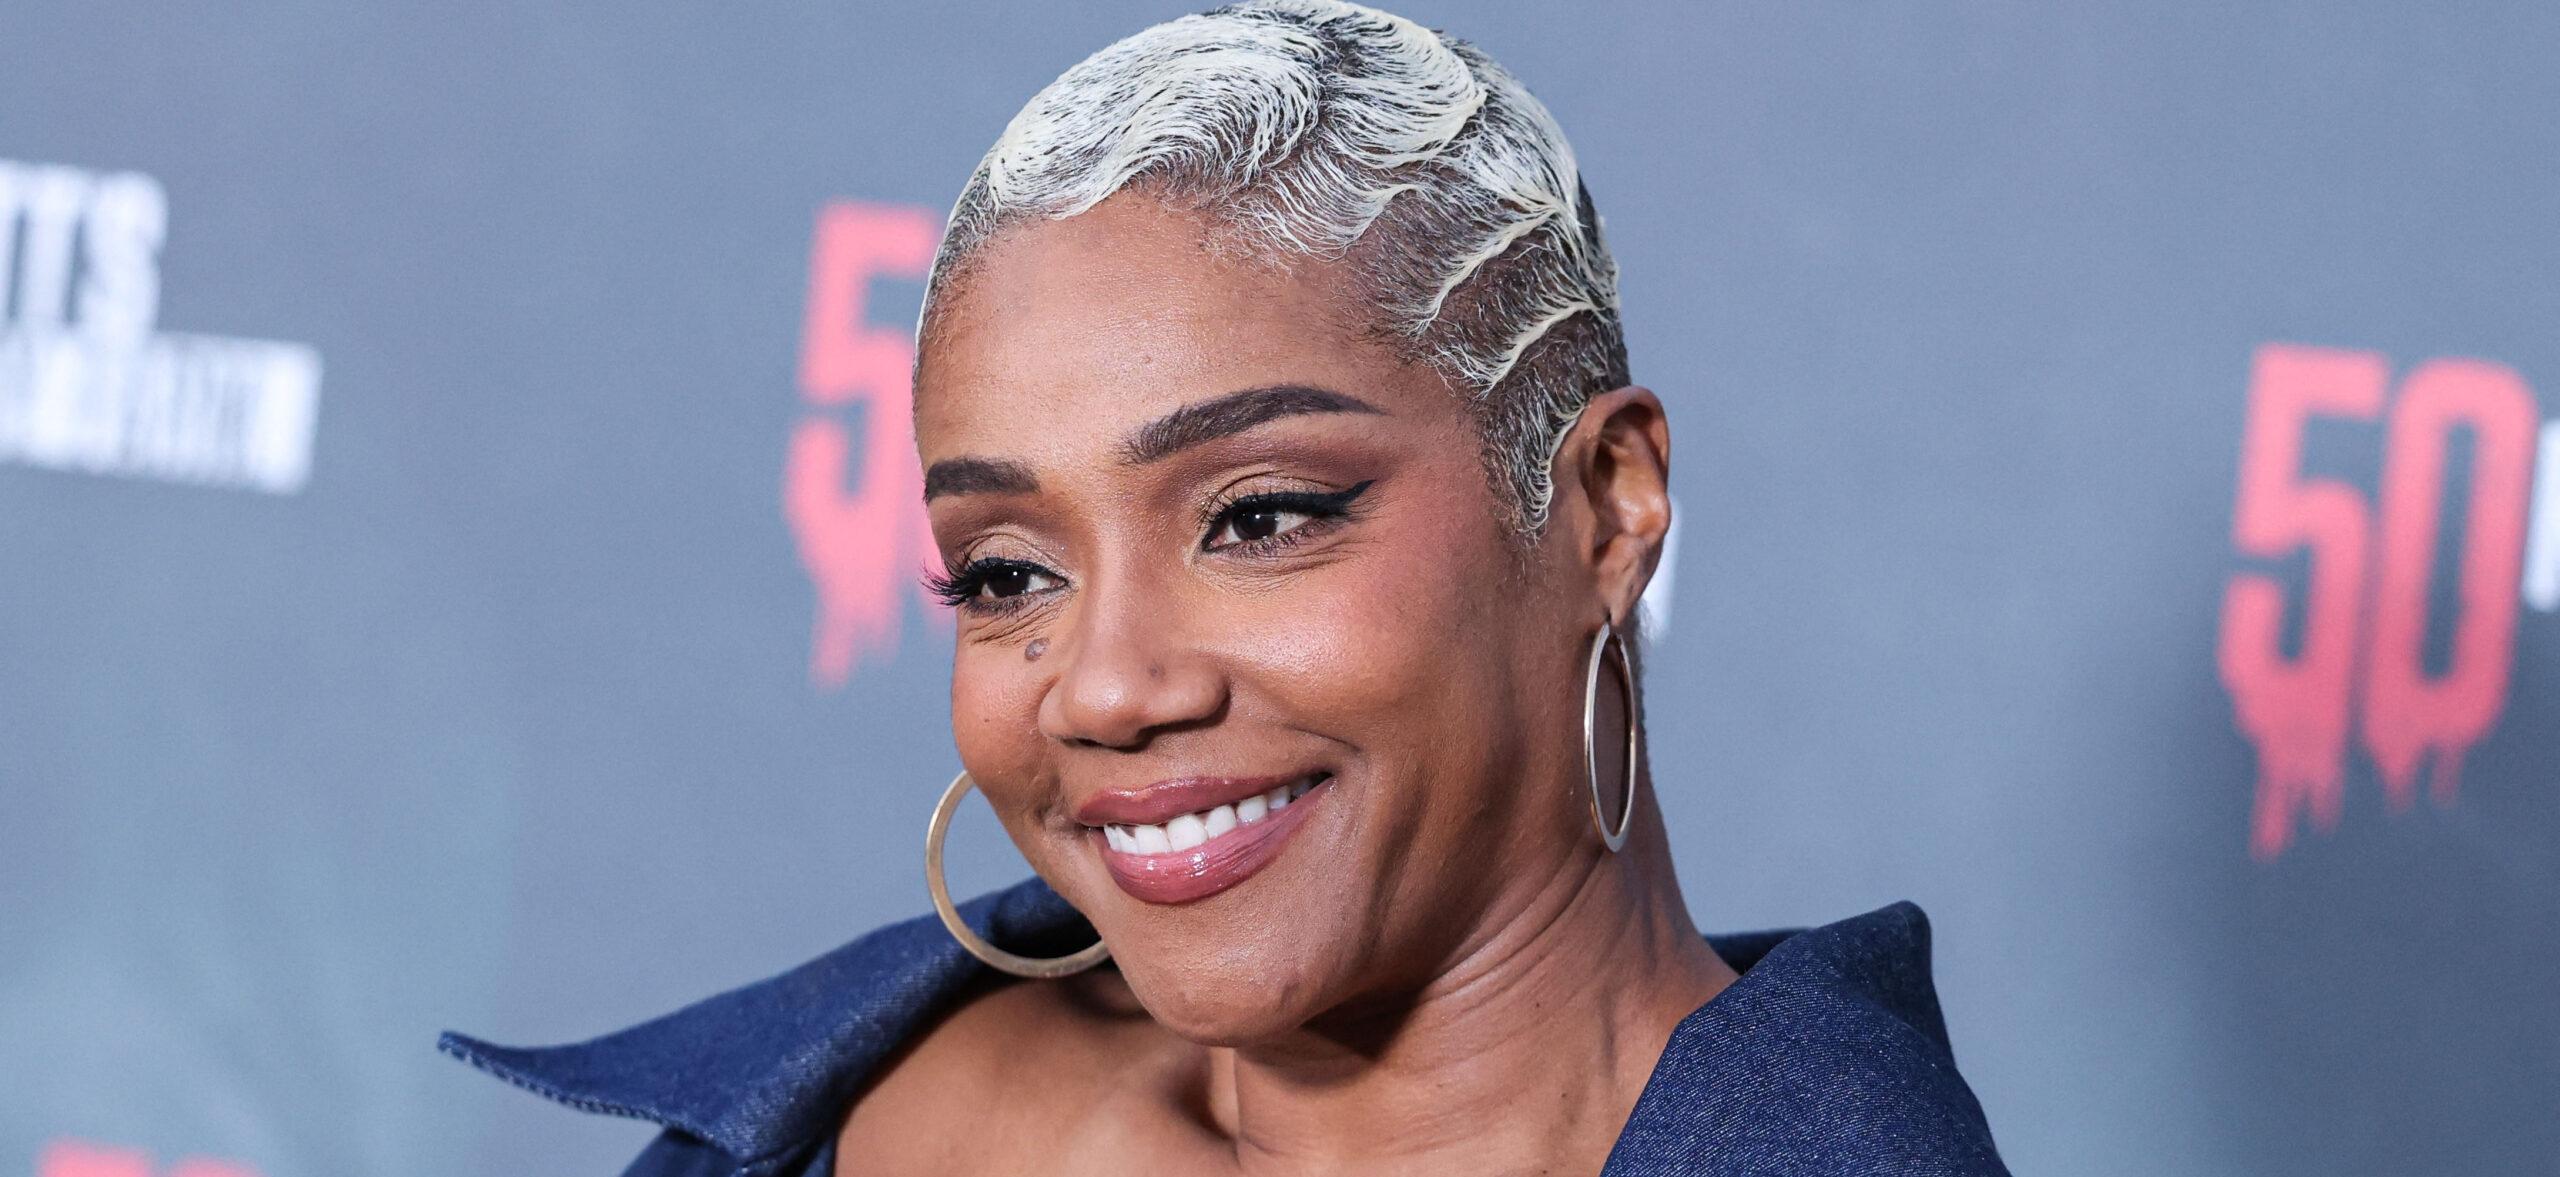 Tiffany Haddish Calls Arrest For Suspected DUI ‘Answered Prayers’